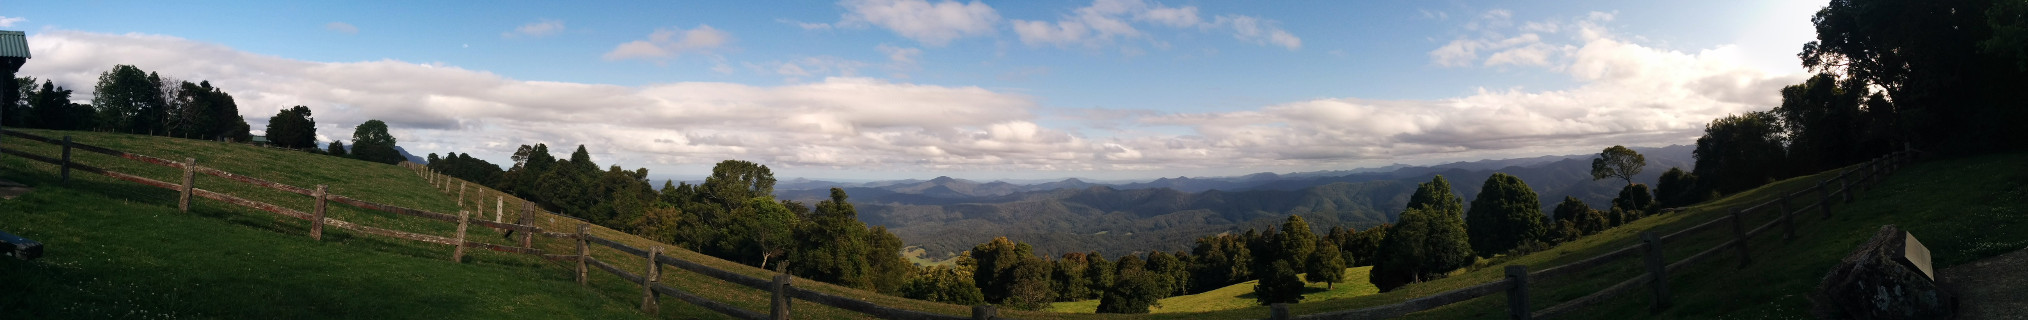 GriffithsLookout